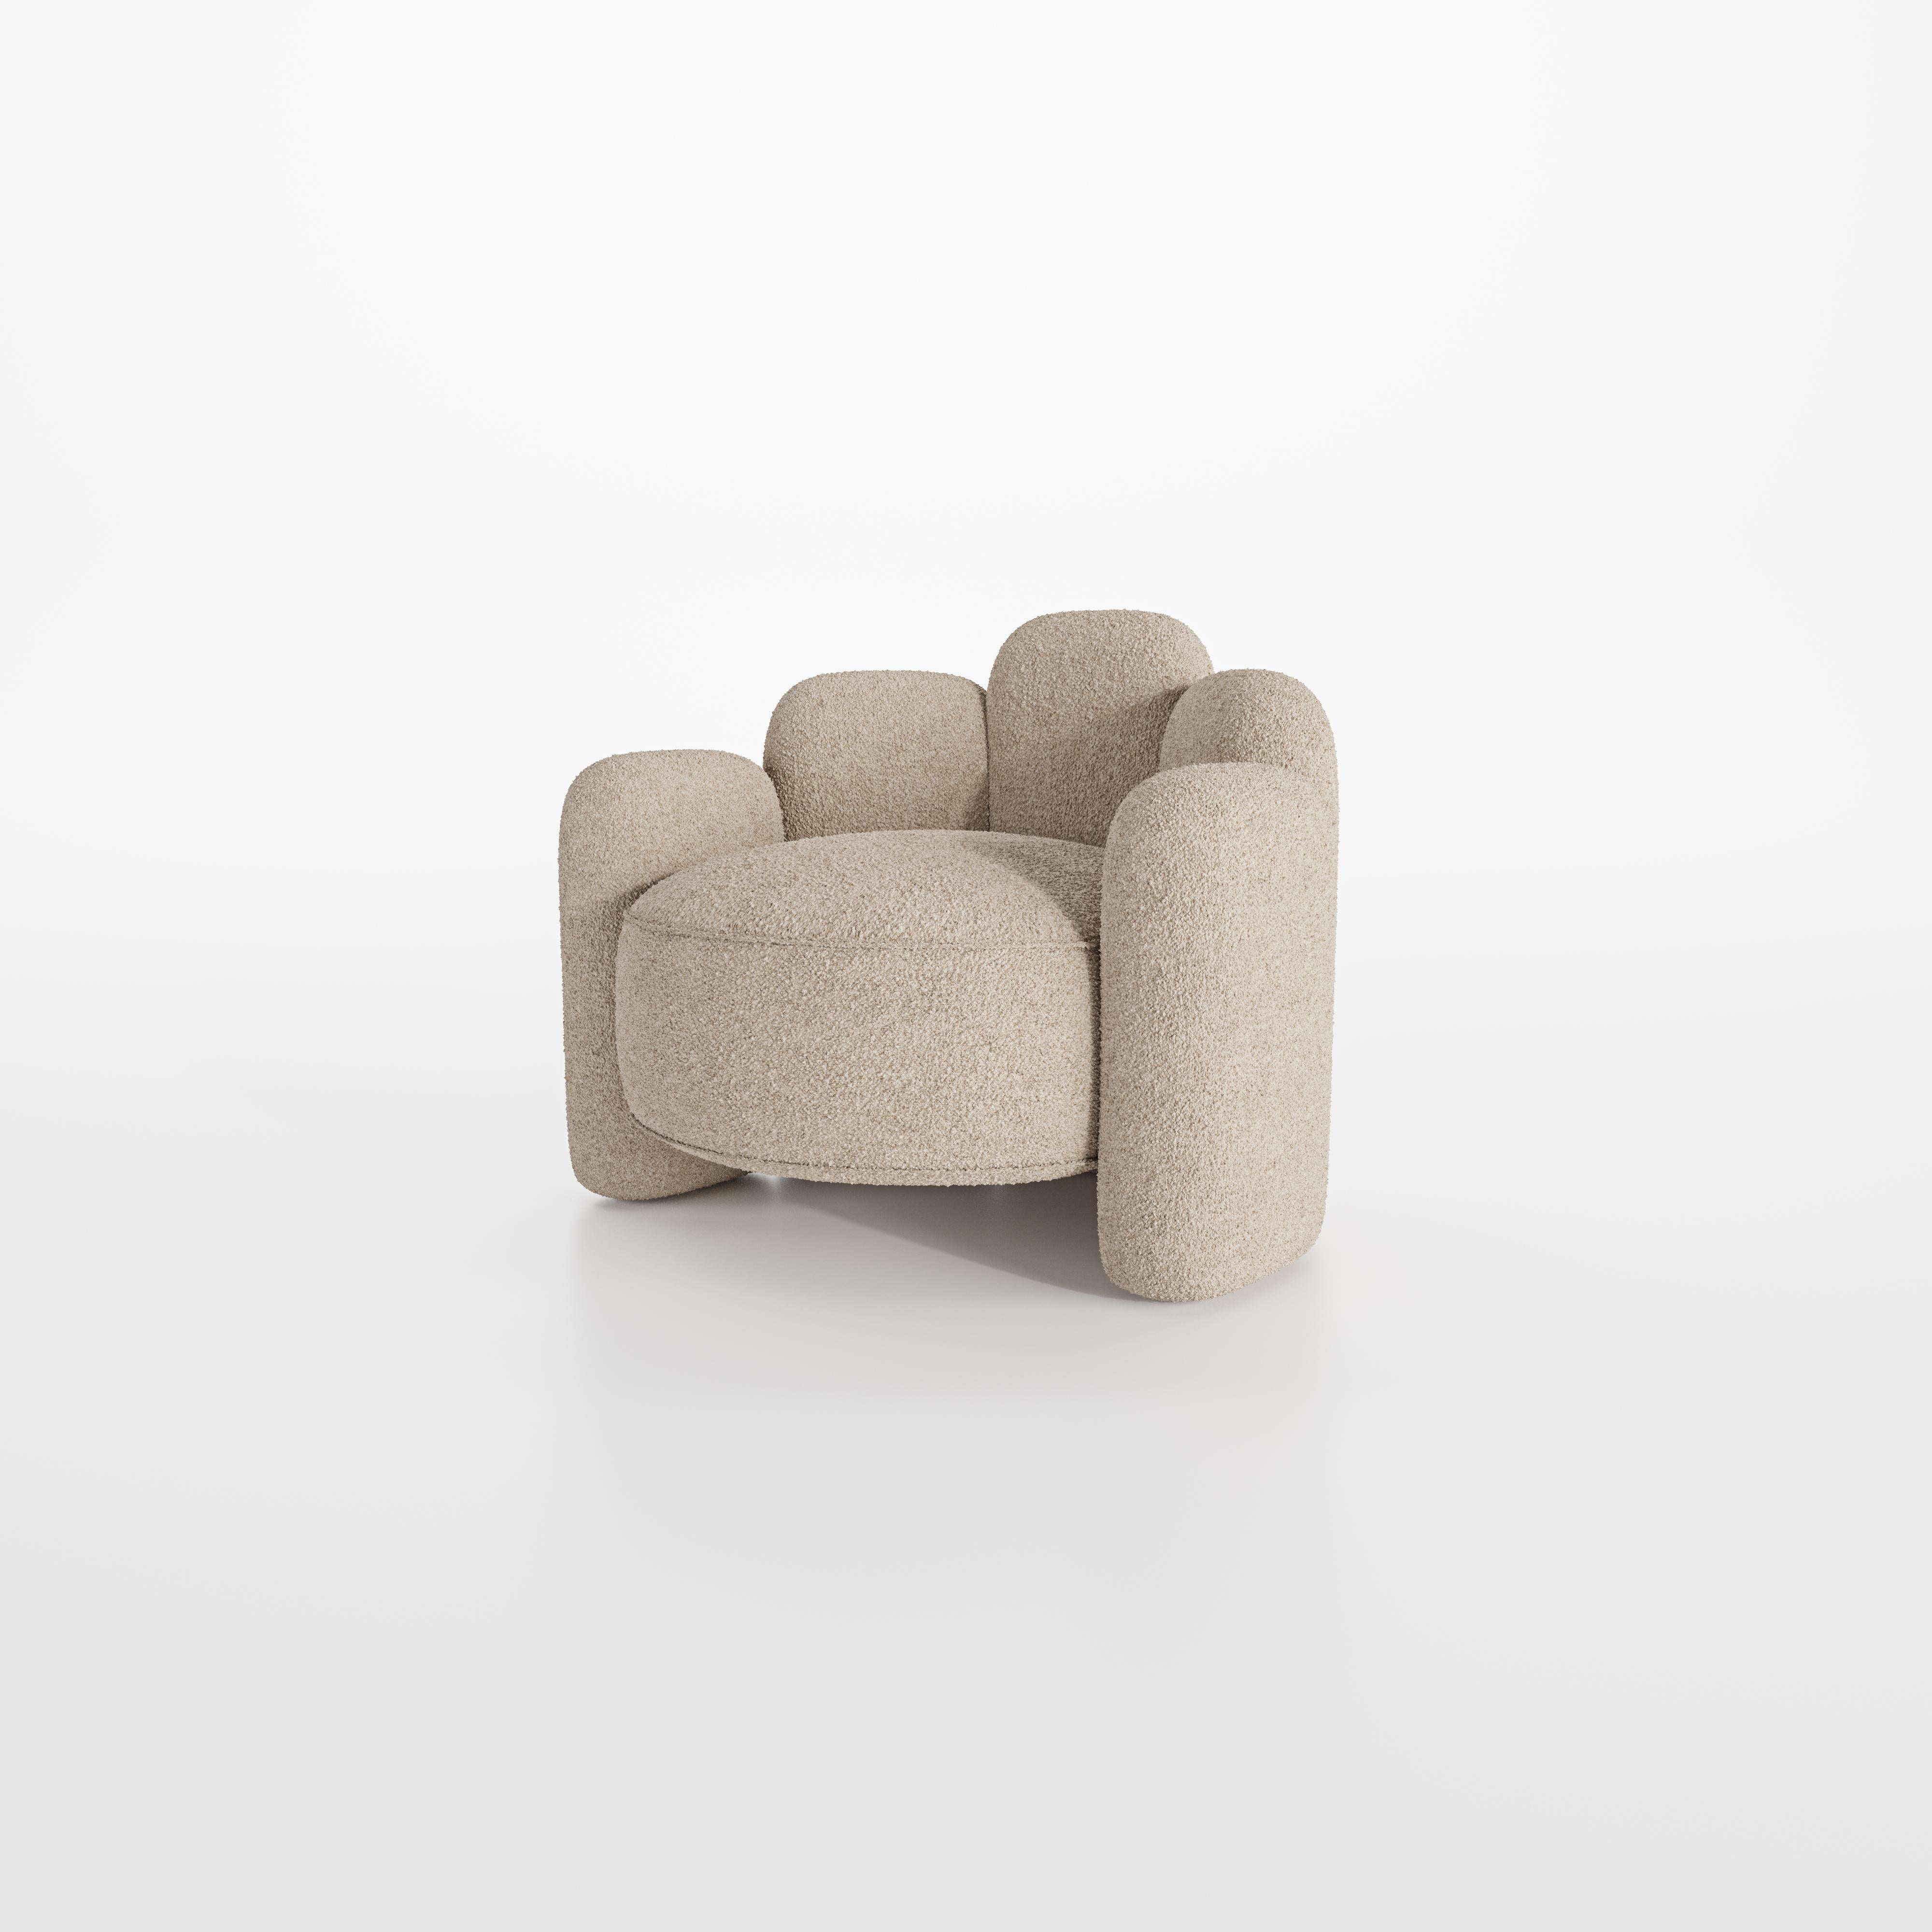 Boucle Champanhe Agnes Sofa by Nelson Araujo
Dimensions: W 80 x D 68 x H 58 cm
Materials: Wood, Velvet and Foam.
Also Available: Misty Beige colour. Please contact us.

Nelson de Araújo, graduated in Product Design. He discovered his passion for the